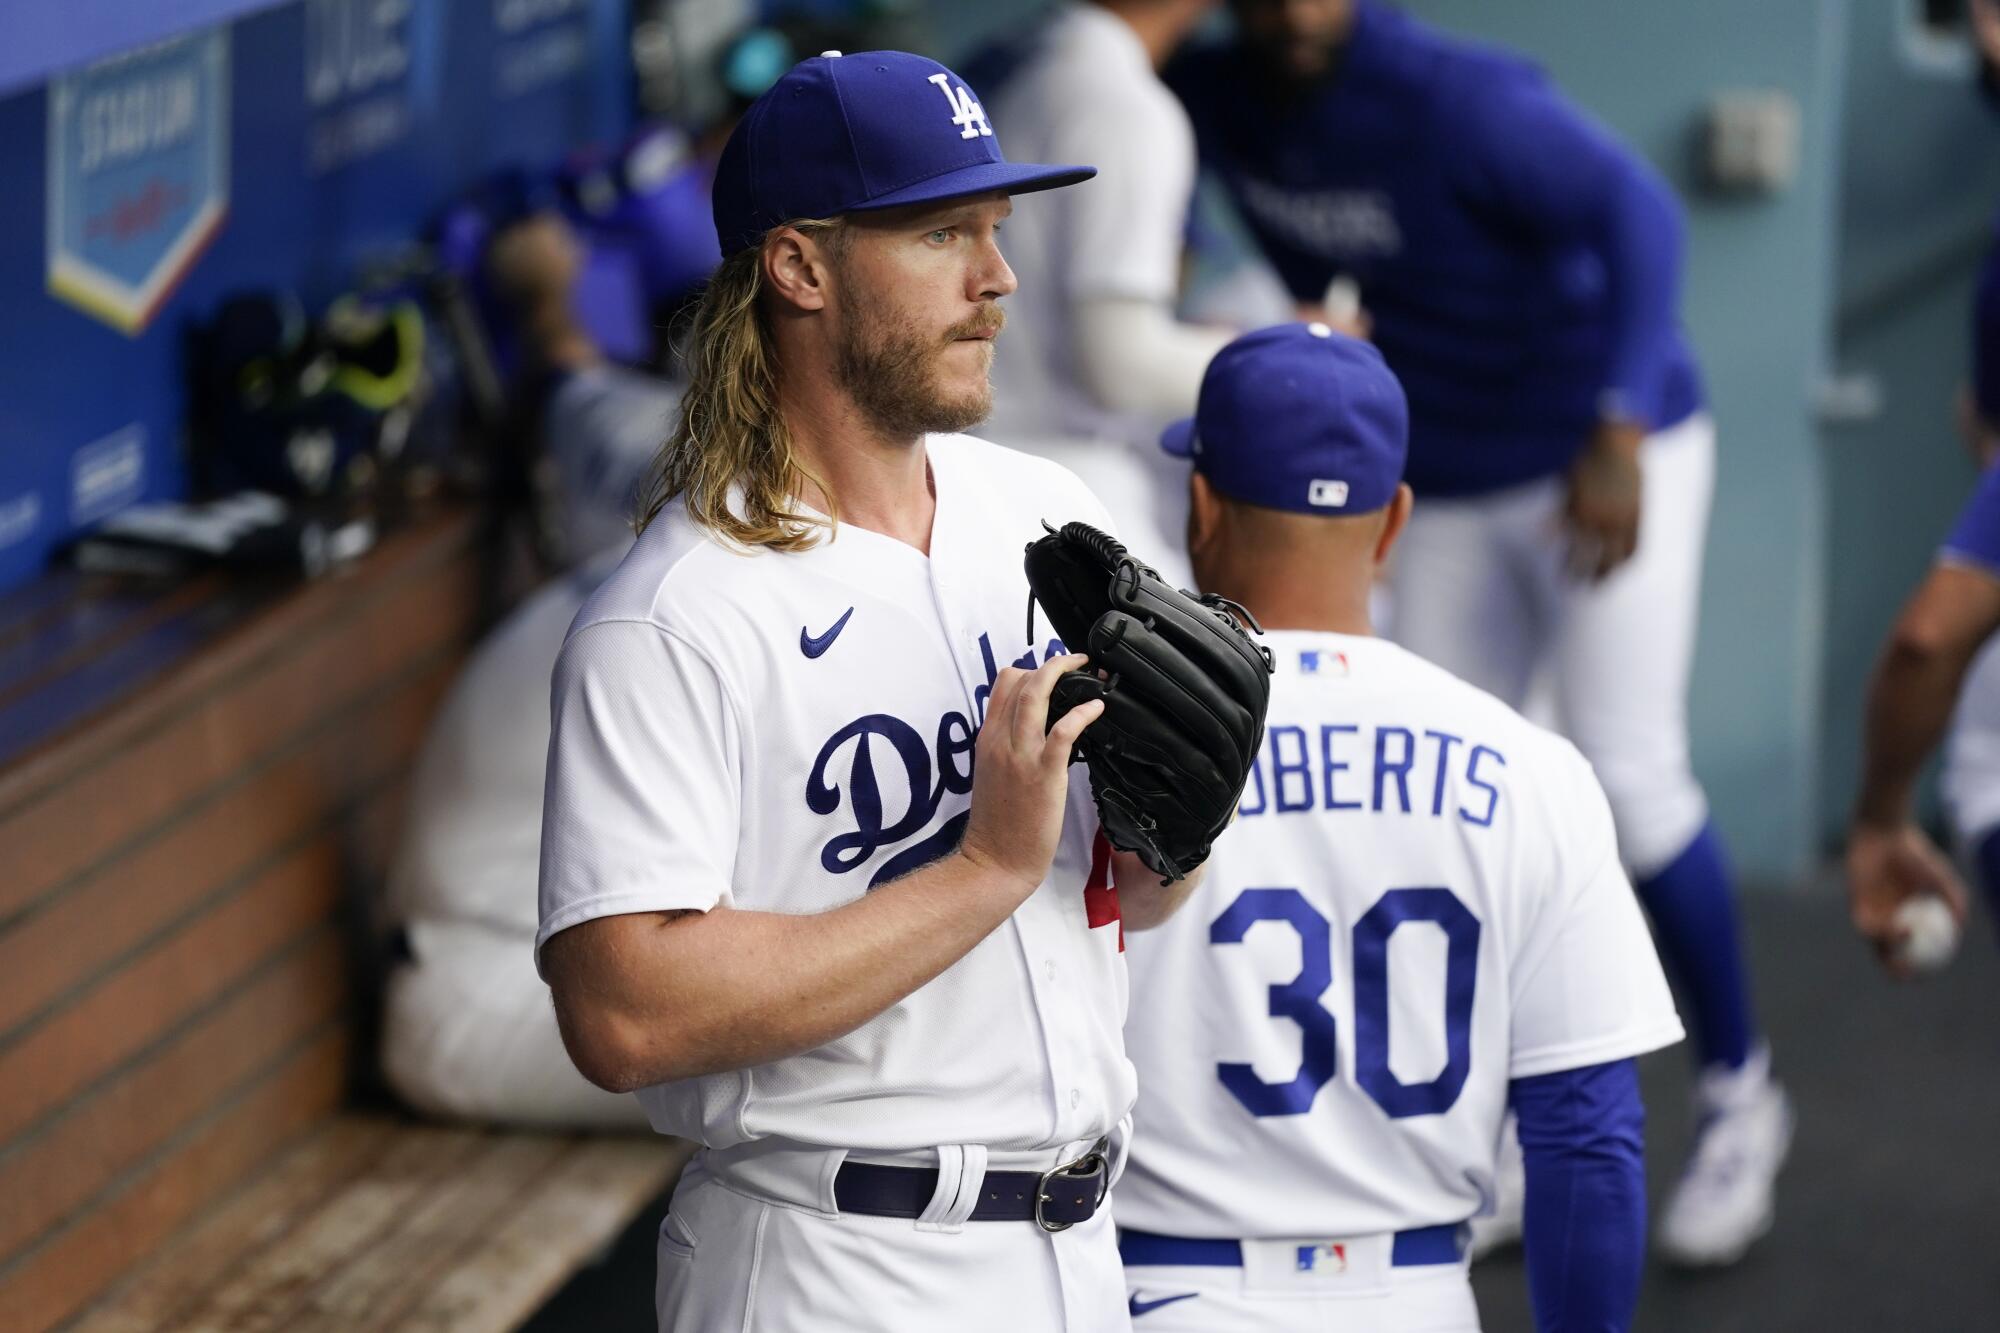 Los Angeles Dodgers starting pitcher Noah Syndergaard (43) stands in the dugout before a baseball game.